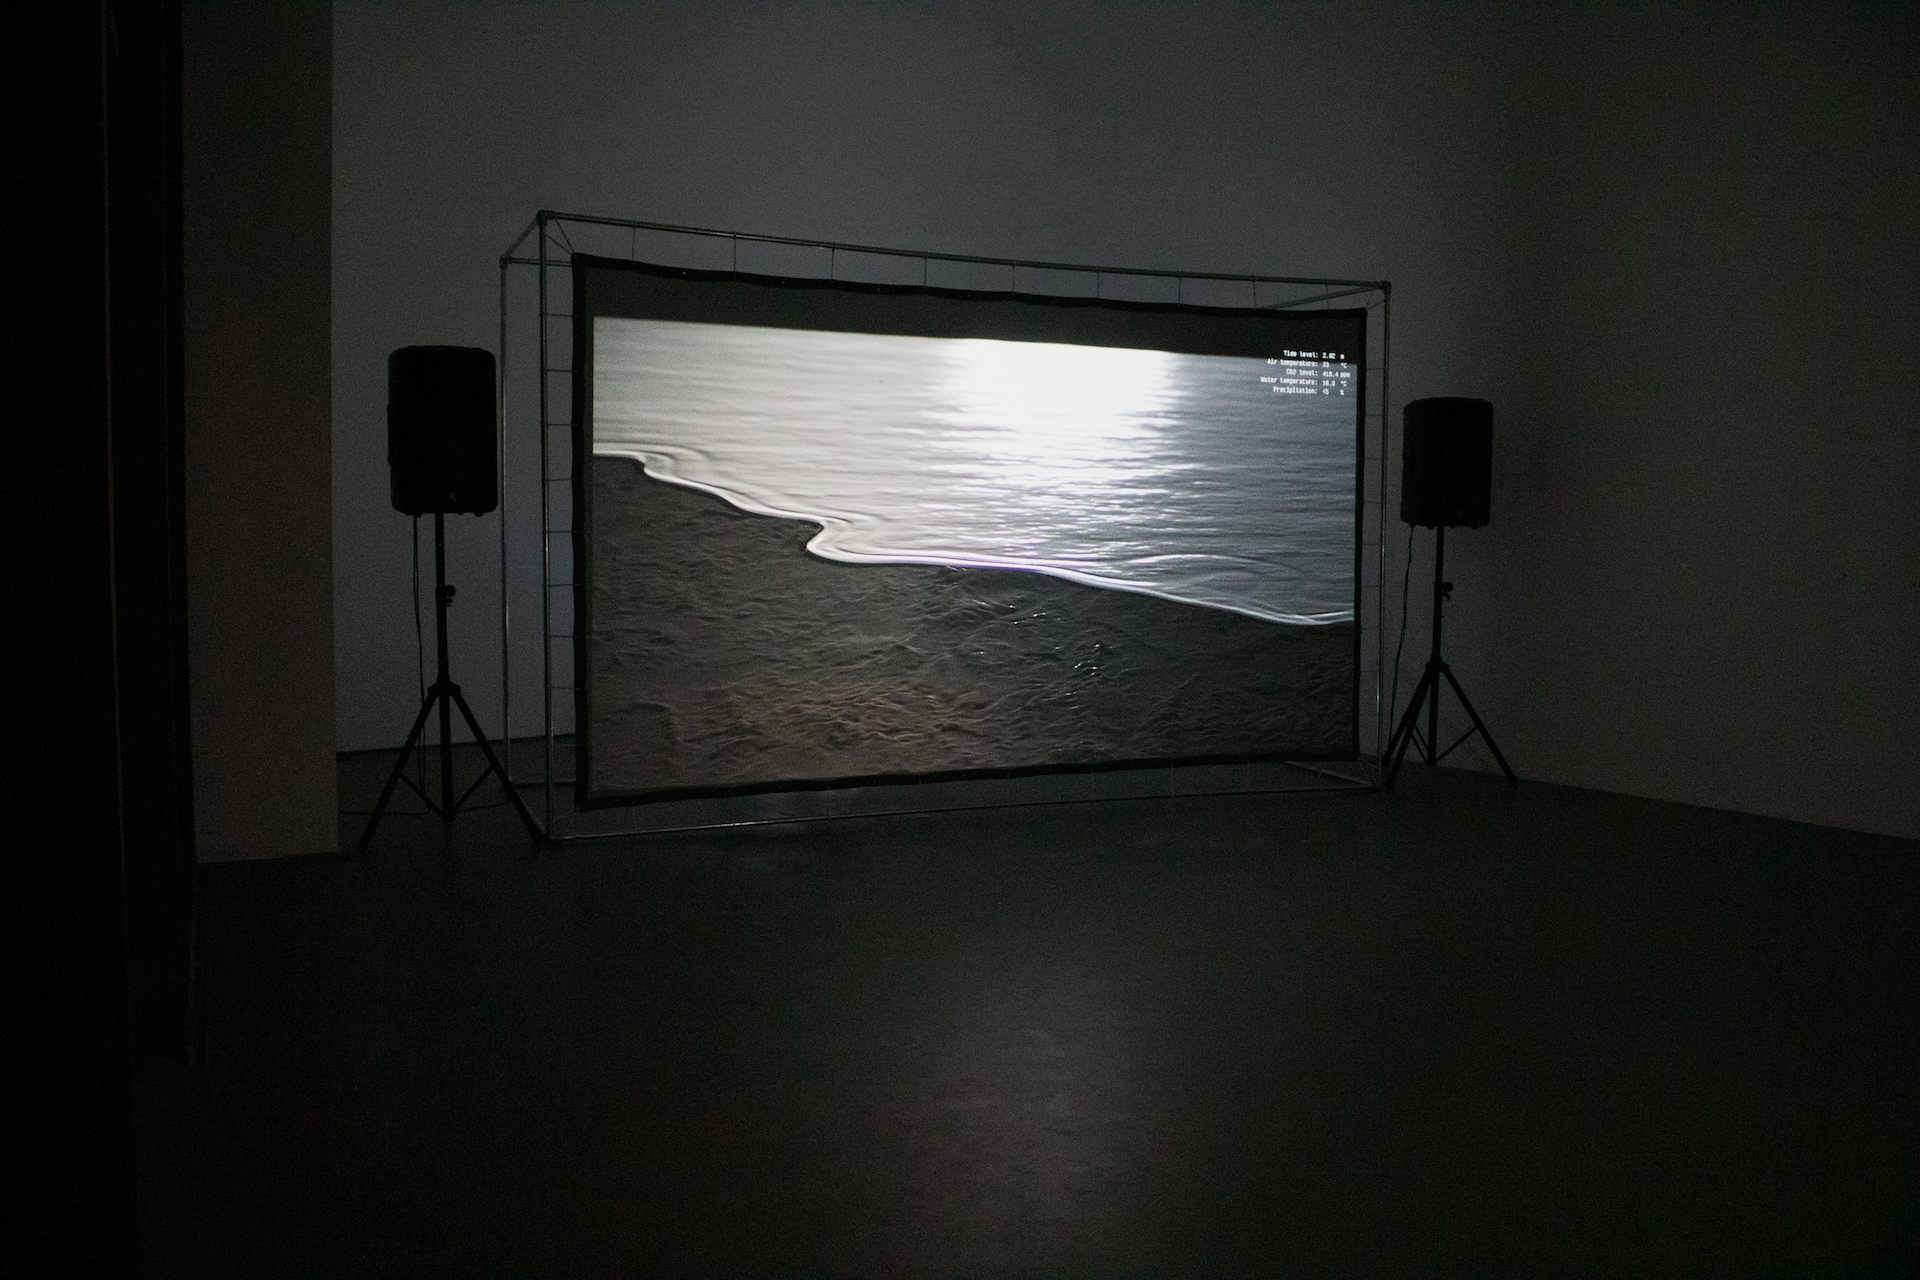 Installation View of Ebb & Flow